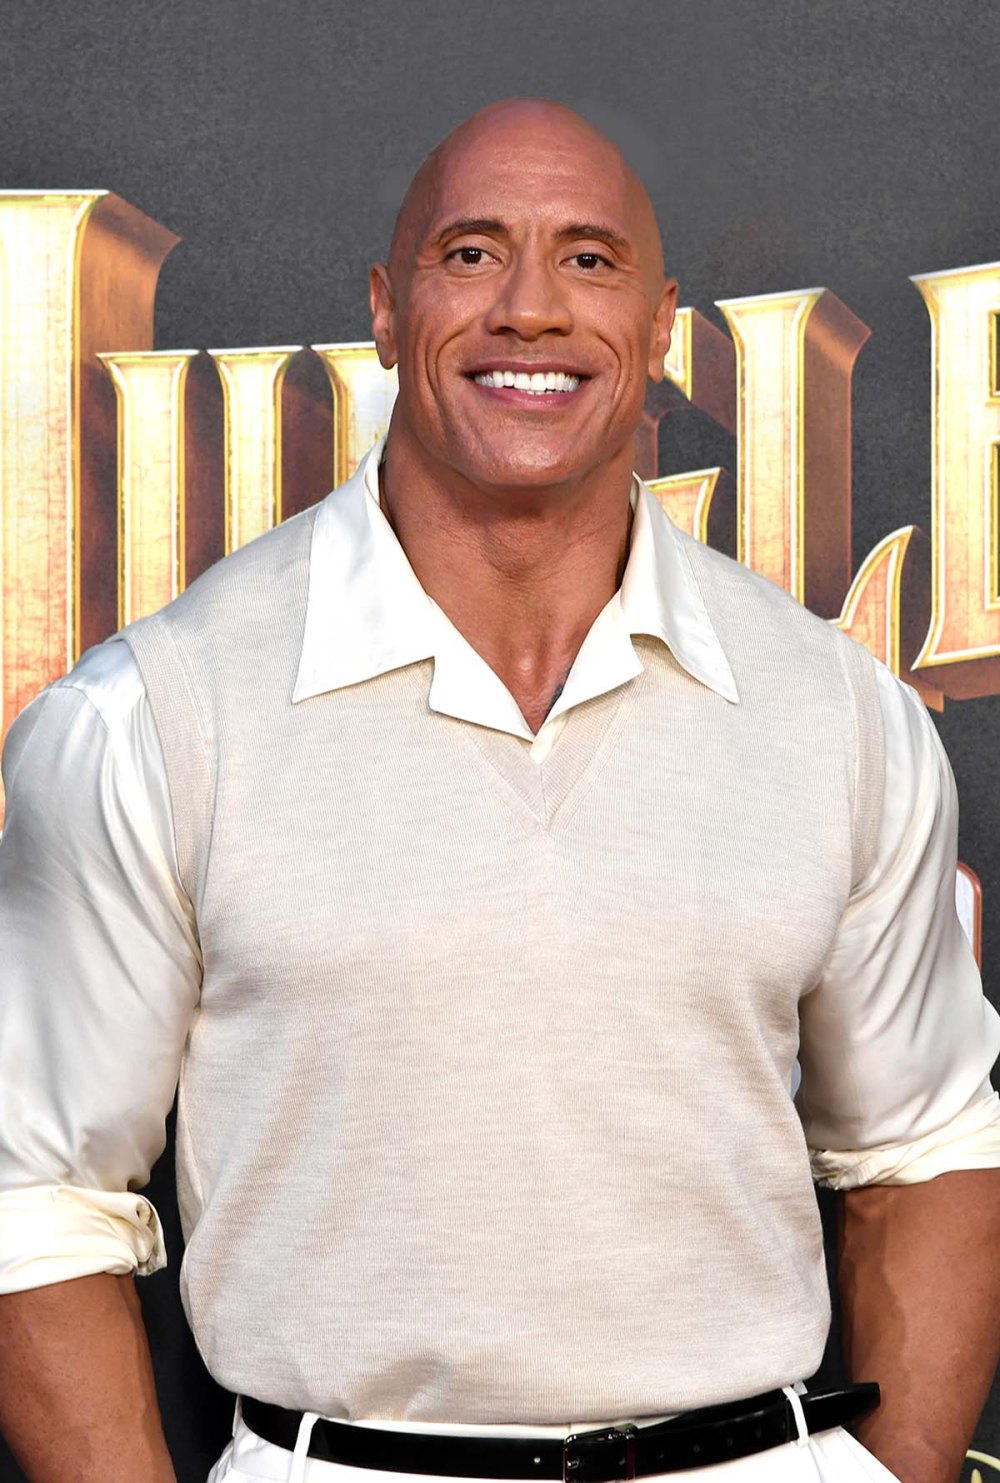 Dwayne 'The Rock' Johnson Reveals Why He Doesn't Have a 'Six-Pack